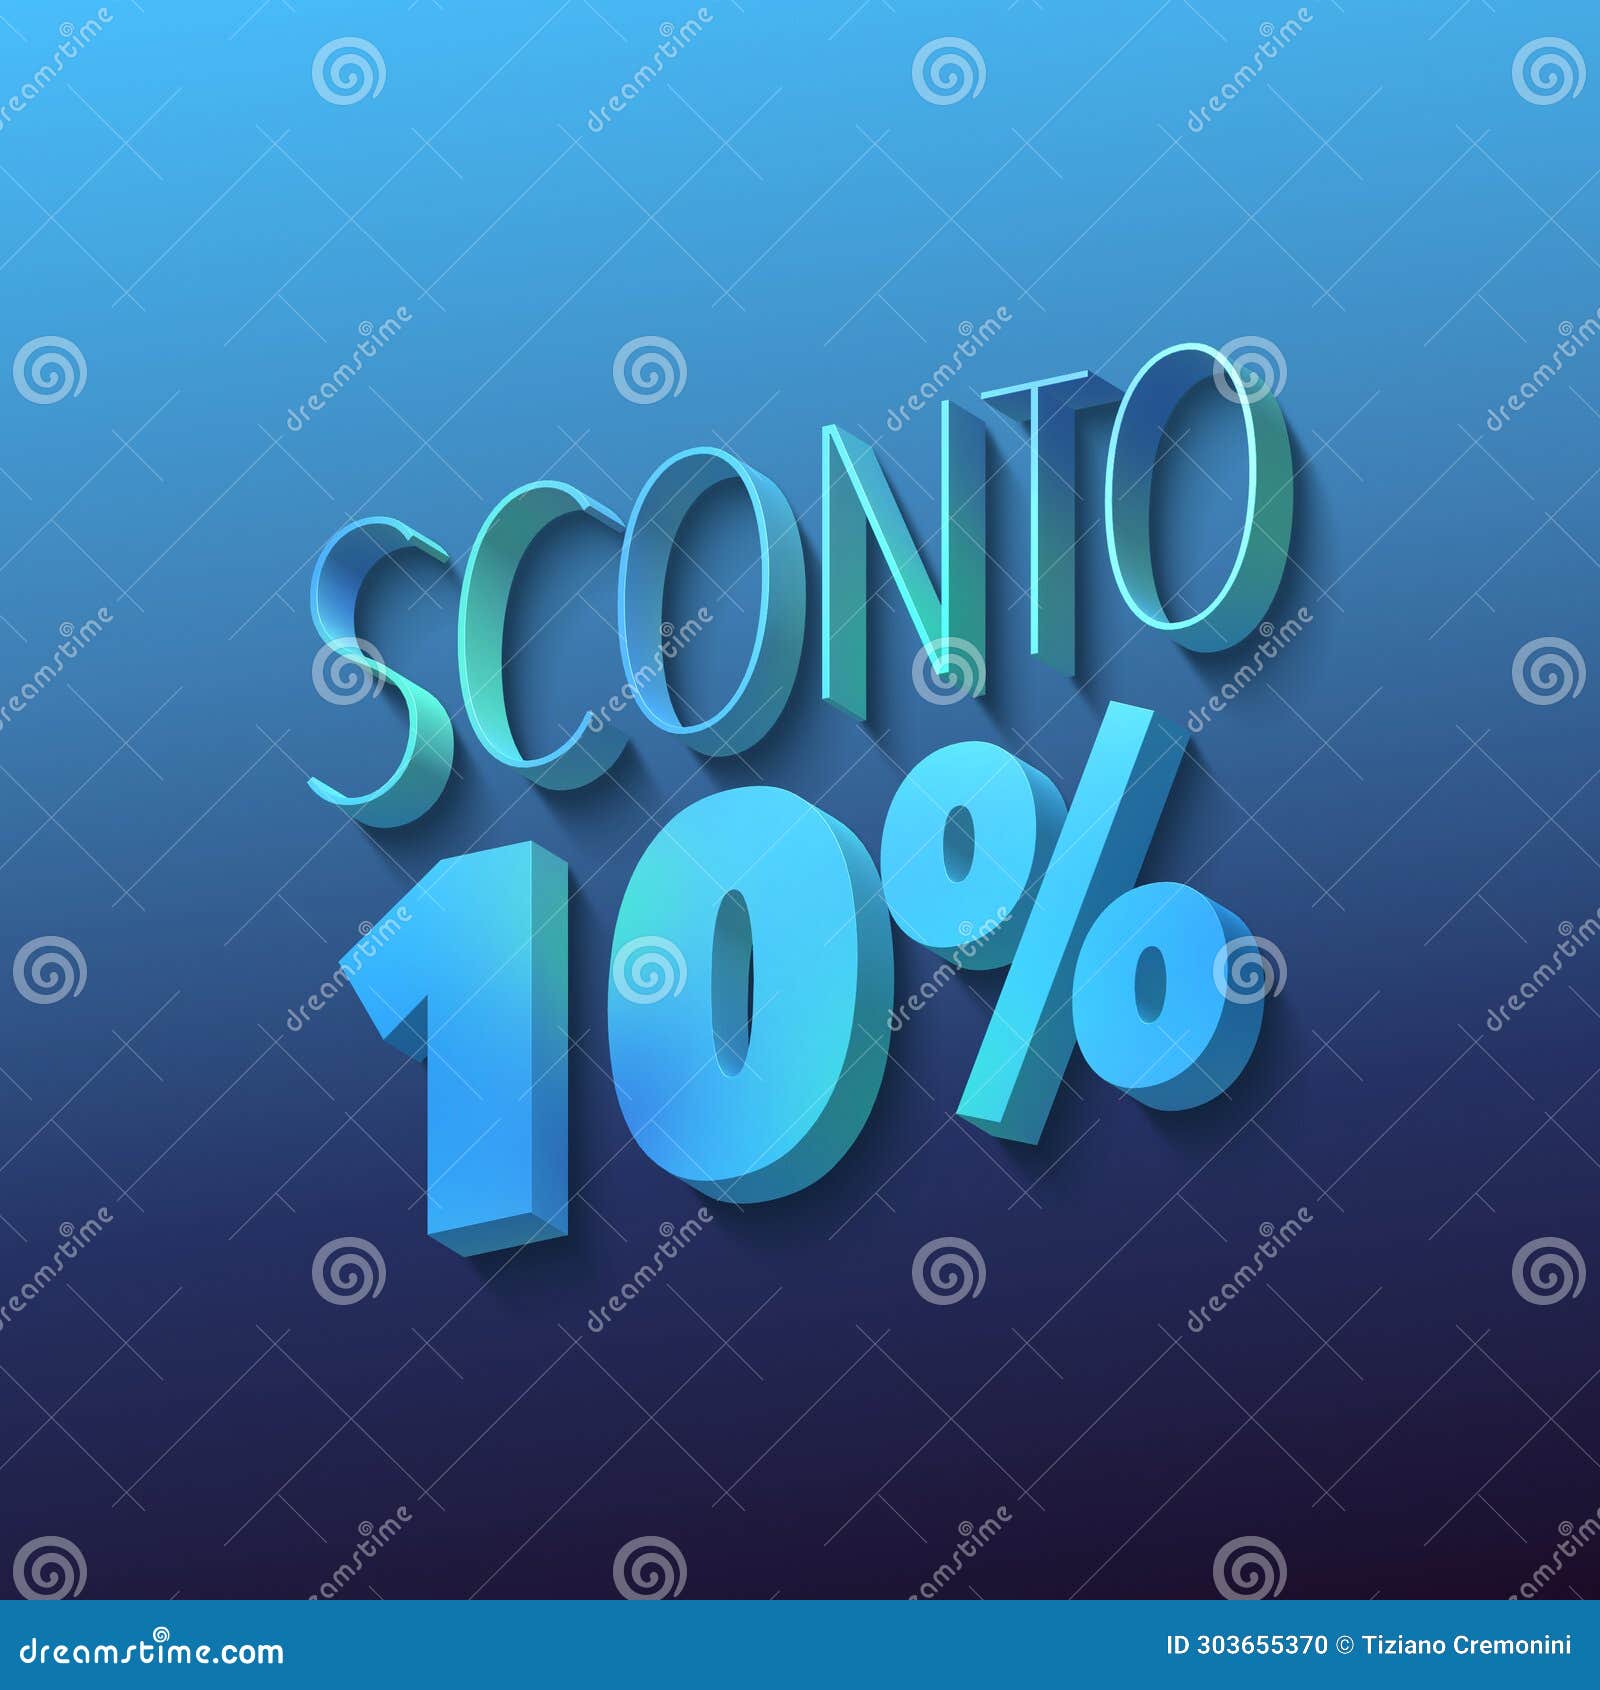 sconto 10%, italian words for 50 percent off, blue letters on blue background, 3d rendering